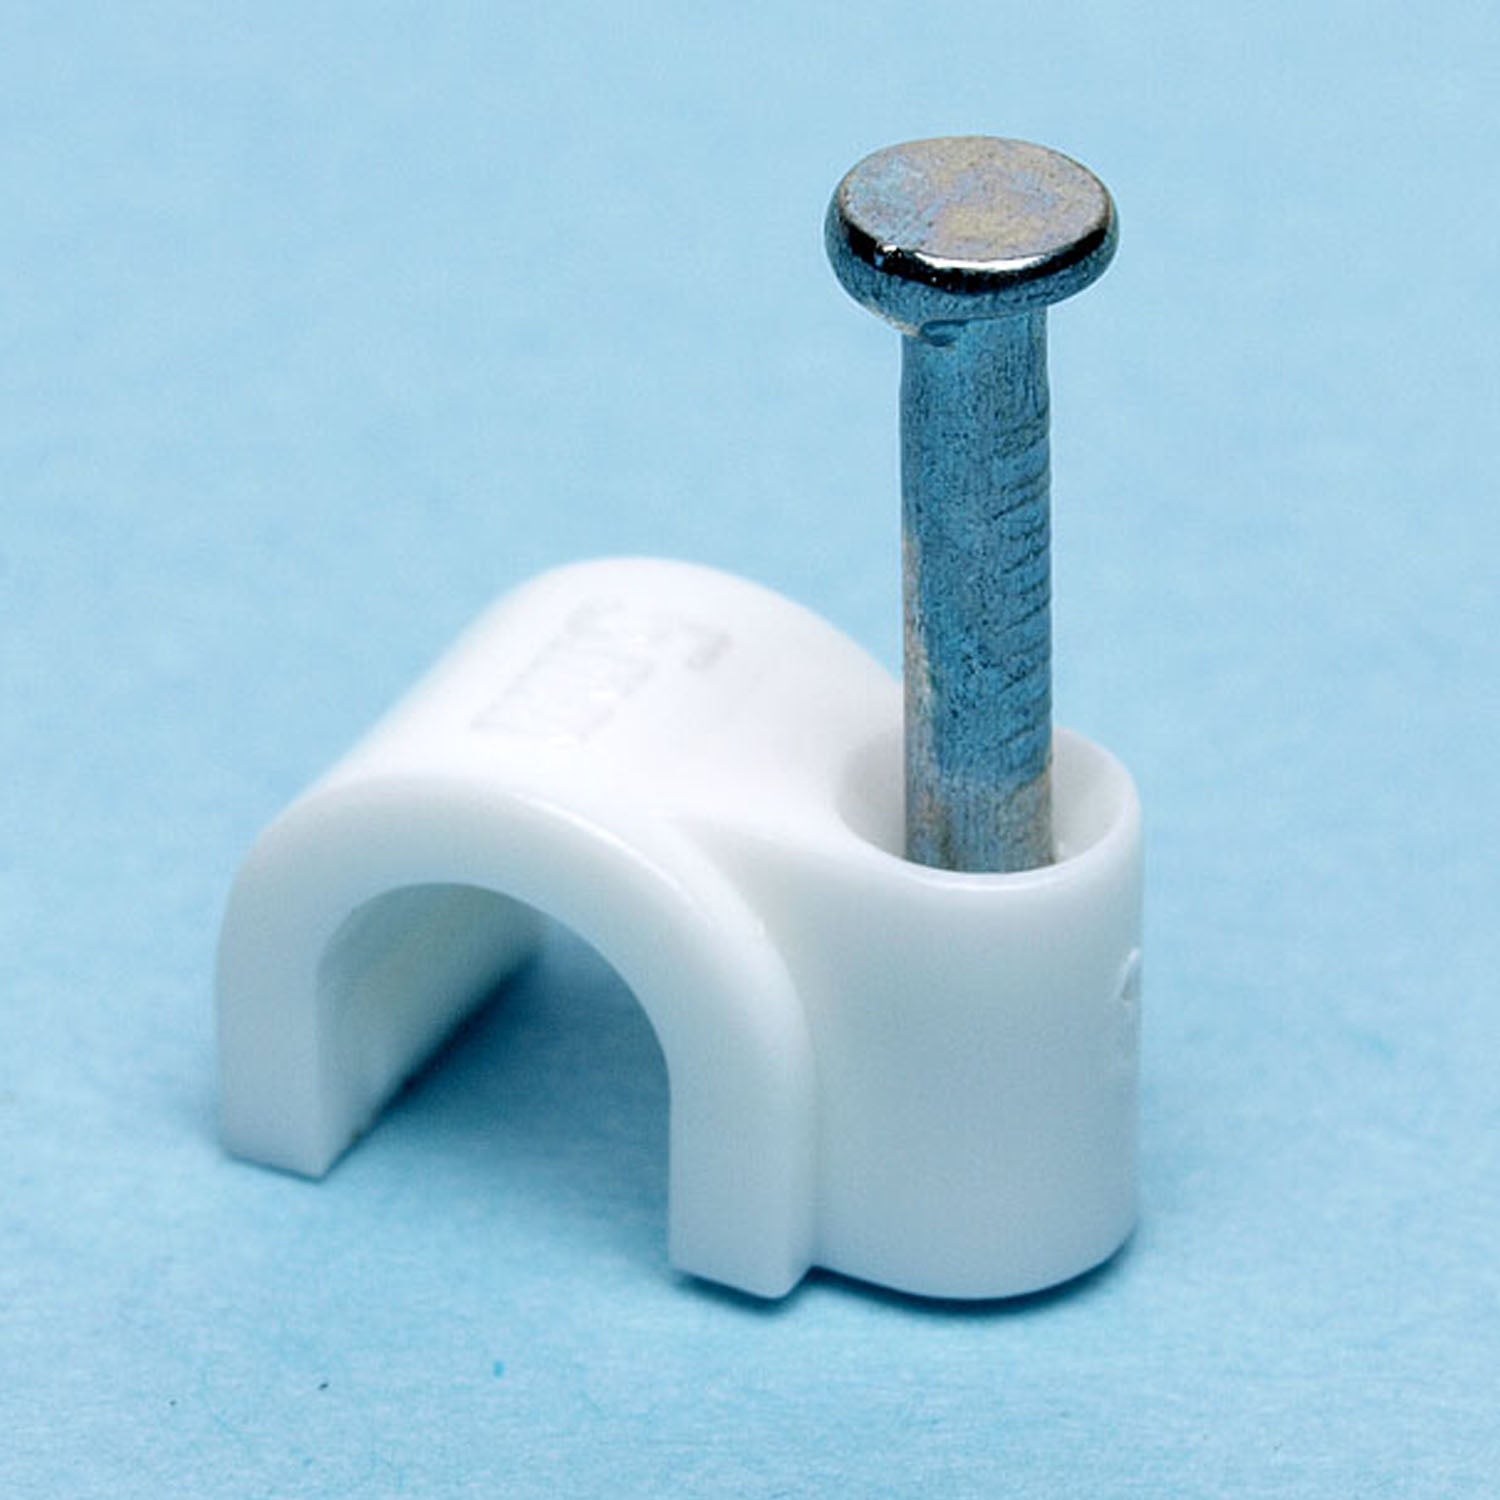 19-CC005W White 5mm Cable Clip For RG59